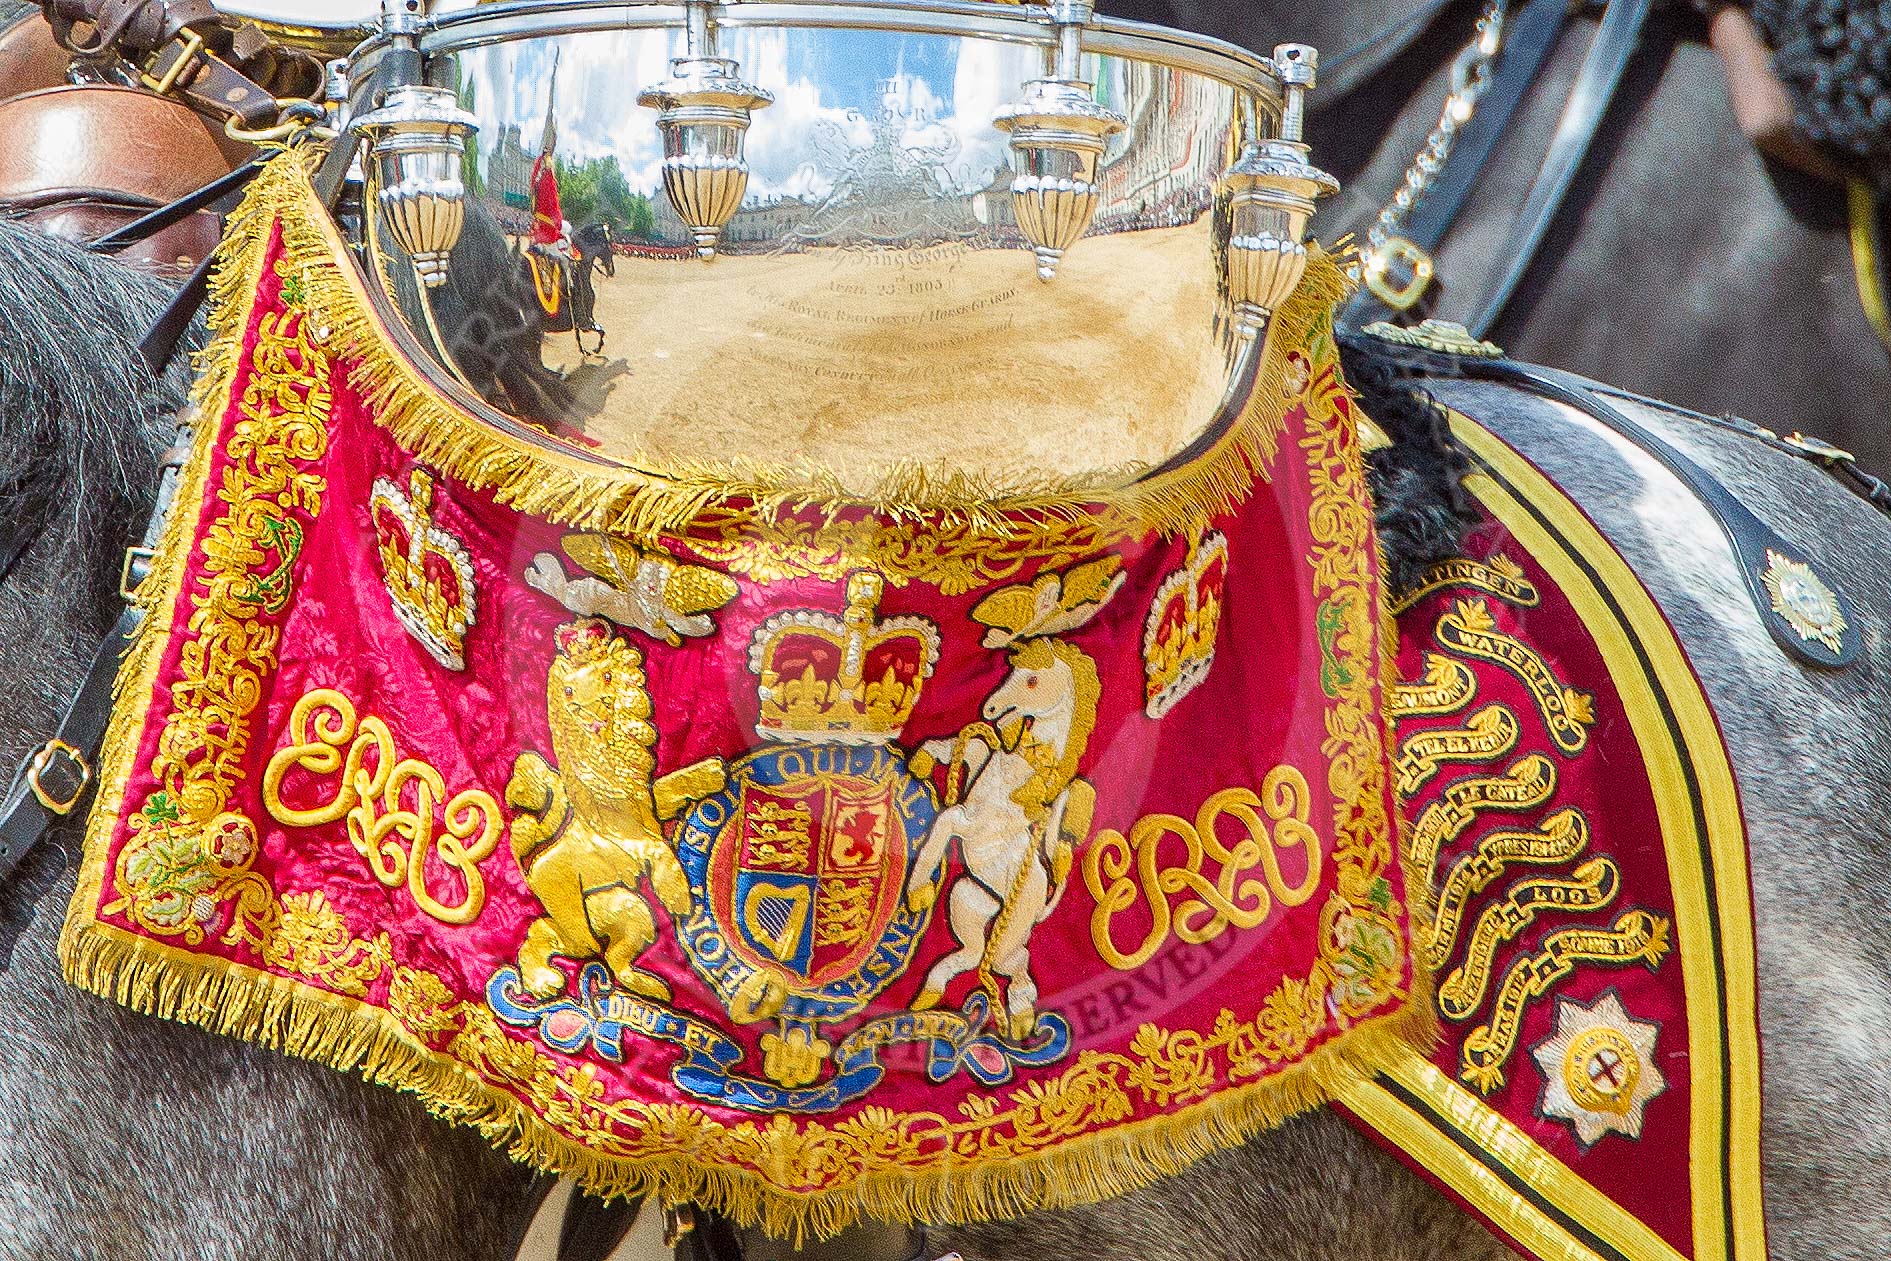 Trooping the Colour 2013: Detail of one of the kettle drums (The Life Guards). Image #654, 15 June 2013 11:53 Horse Guards Parade, London, UK